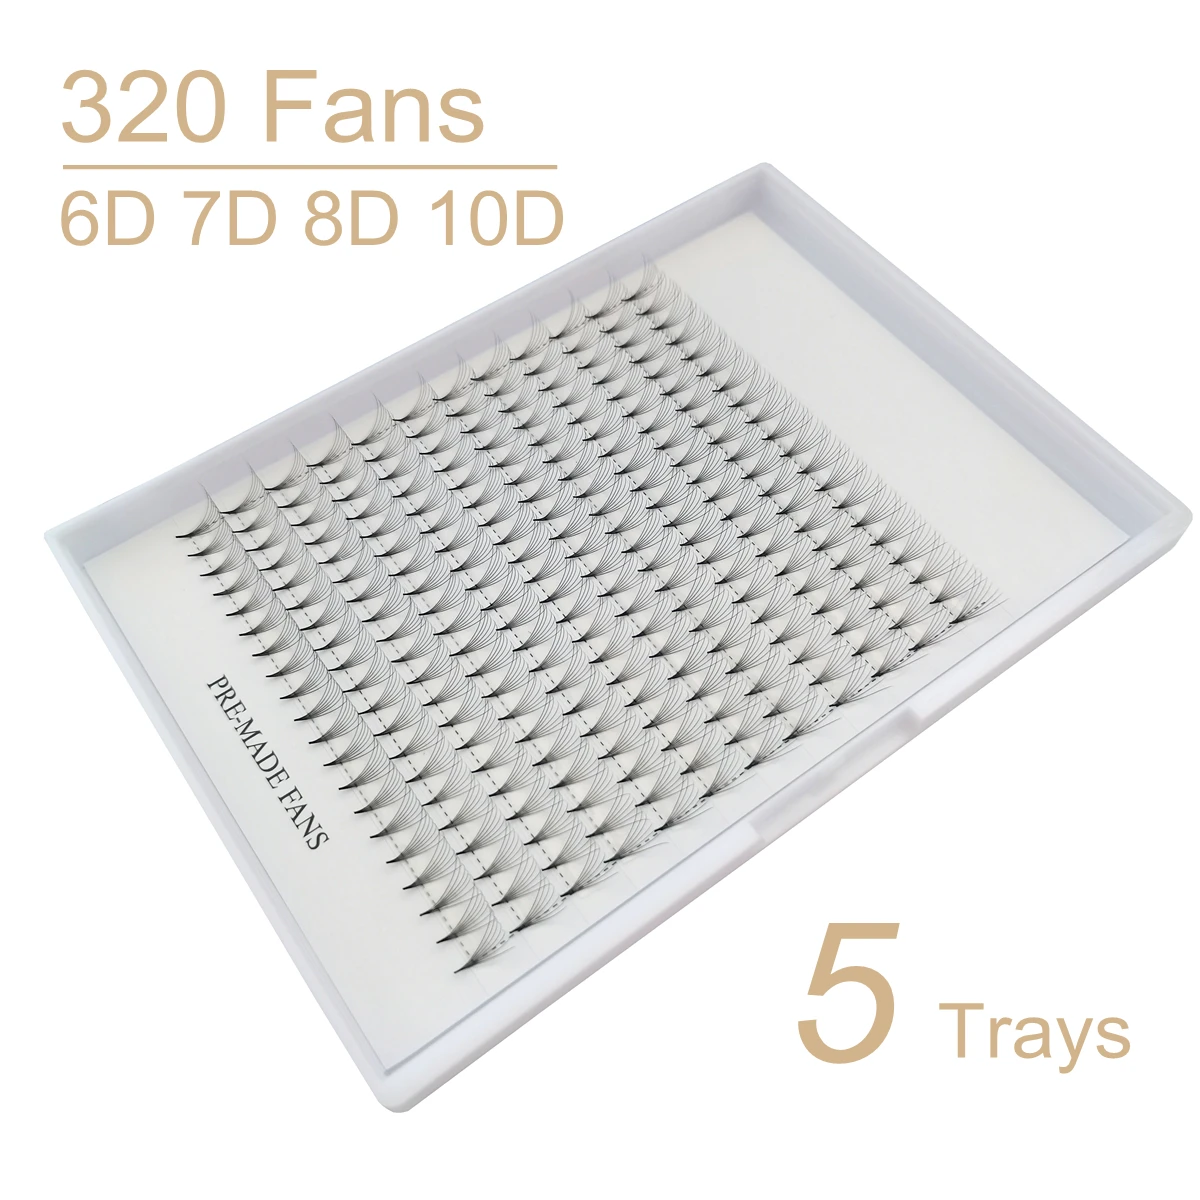 5 Trays 6D 7D 8D 10D Premade Fans Eyelashes Extension Pointy Stem Large Capacity 320 Fans C/D 0.07mm Individual Lashes For Salon